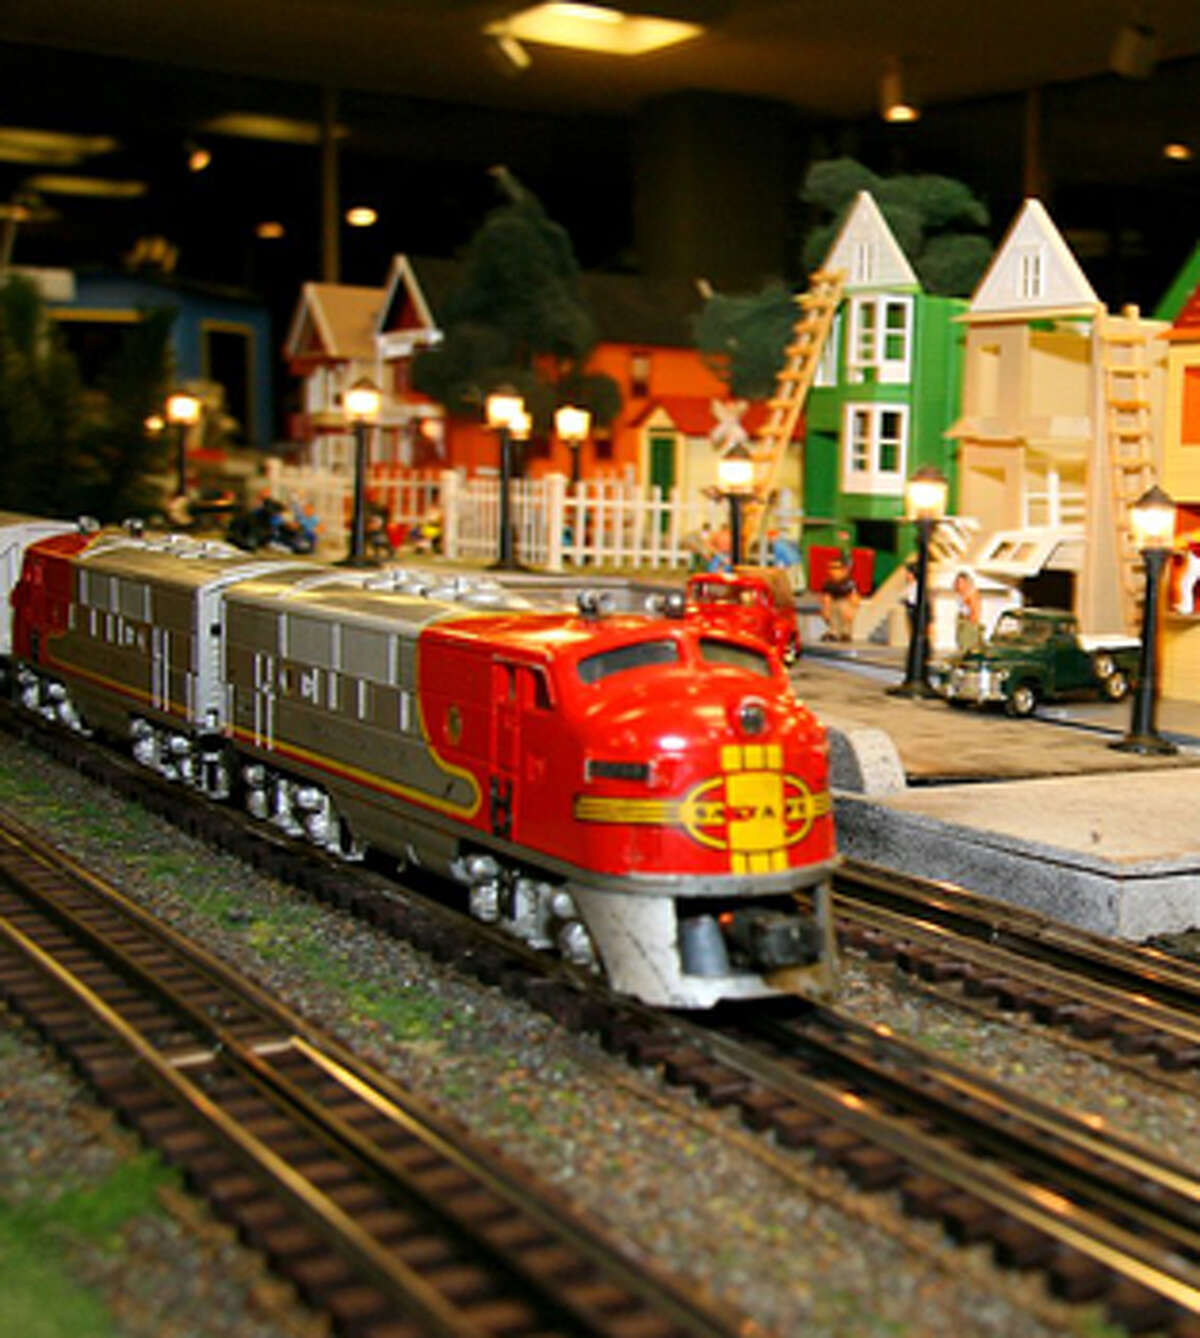 Courtesy Photo / News AdvocateThe Festival of Trains in Traverse City takes place until Jan. 3, 2015 at the History Center of Traverse City. It showcases interactive and model train sets.